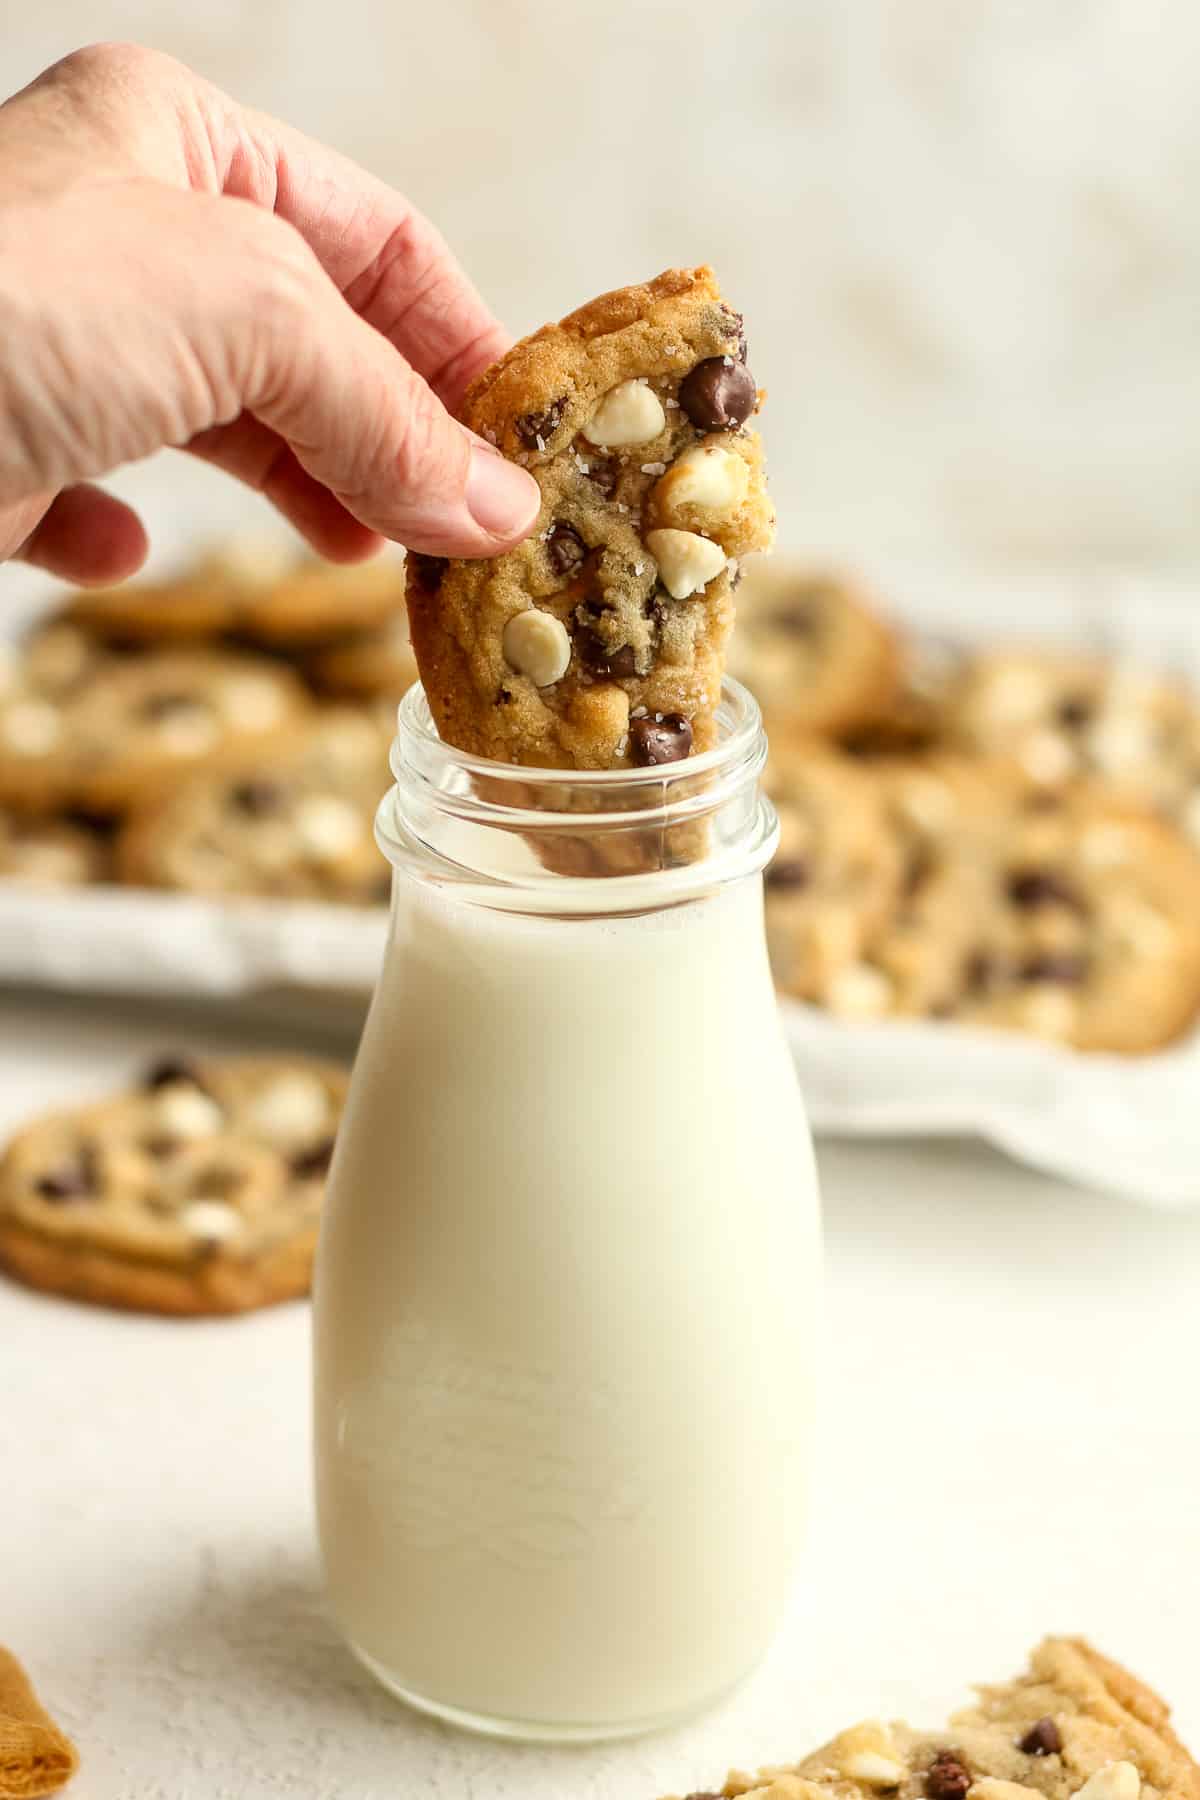 A hand dipping a half cookie into a jar of milk.